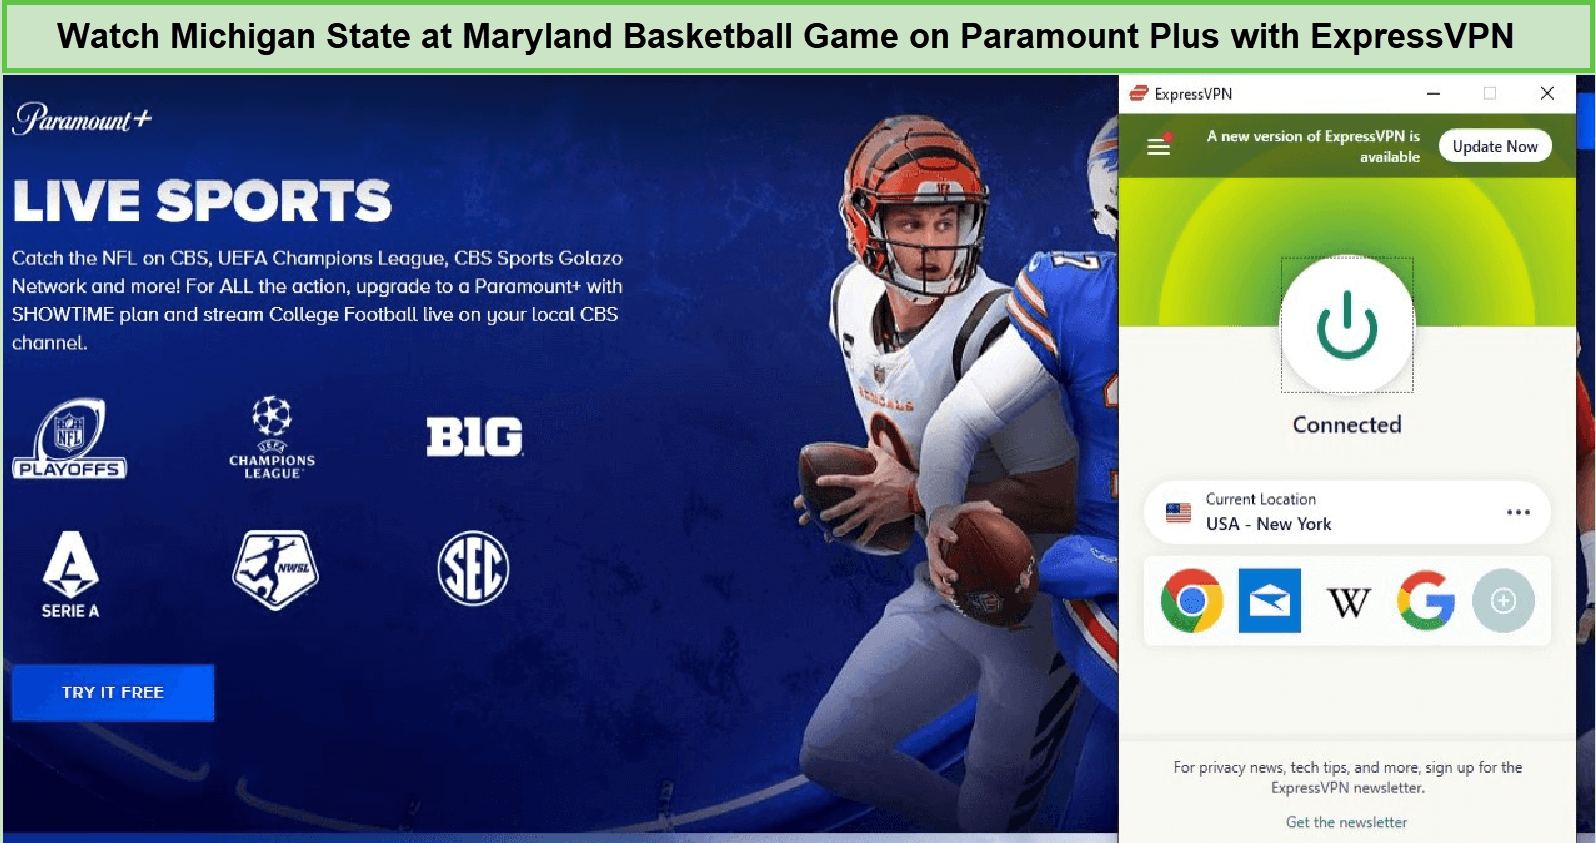 Watch-Michigan-State-at-Maryland-Basketball-Game-outside-USA-on-Paramount-Plus-with-ExpressVPN